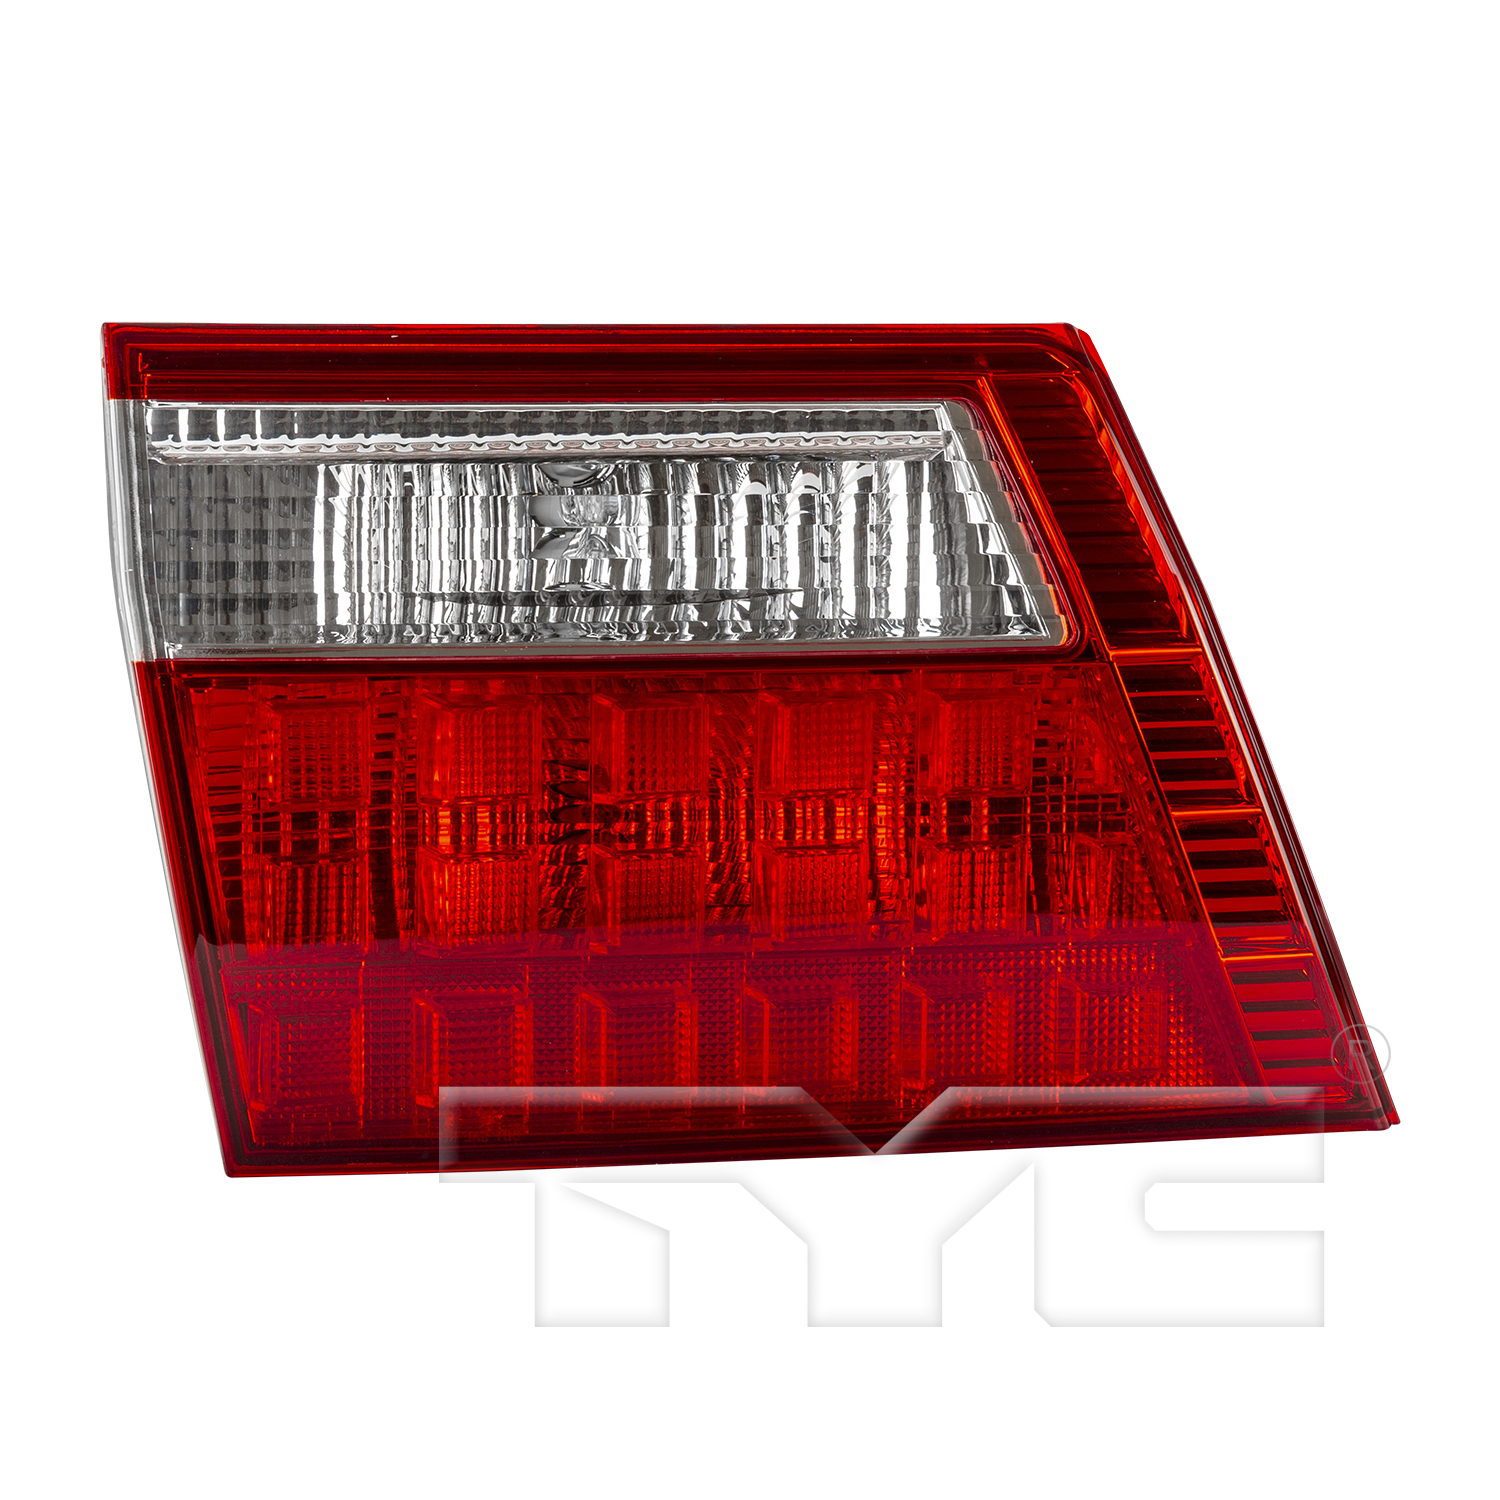 Aftermarket TAILLIGHTS for HONDA - ODYSSEY, ODYSSEY,05-07,LT Taillamp assy